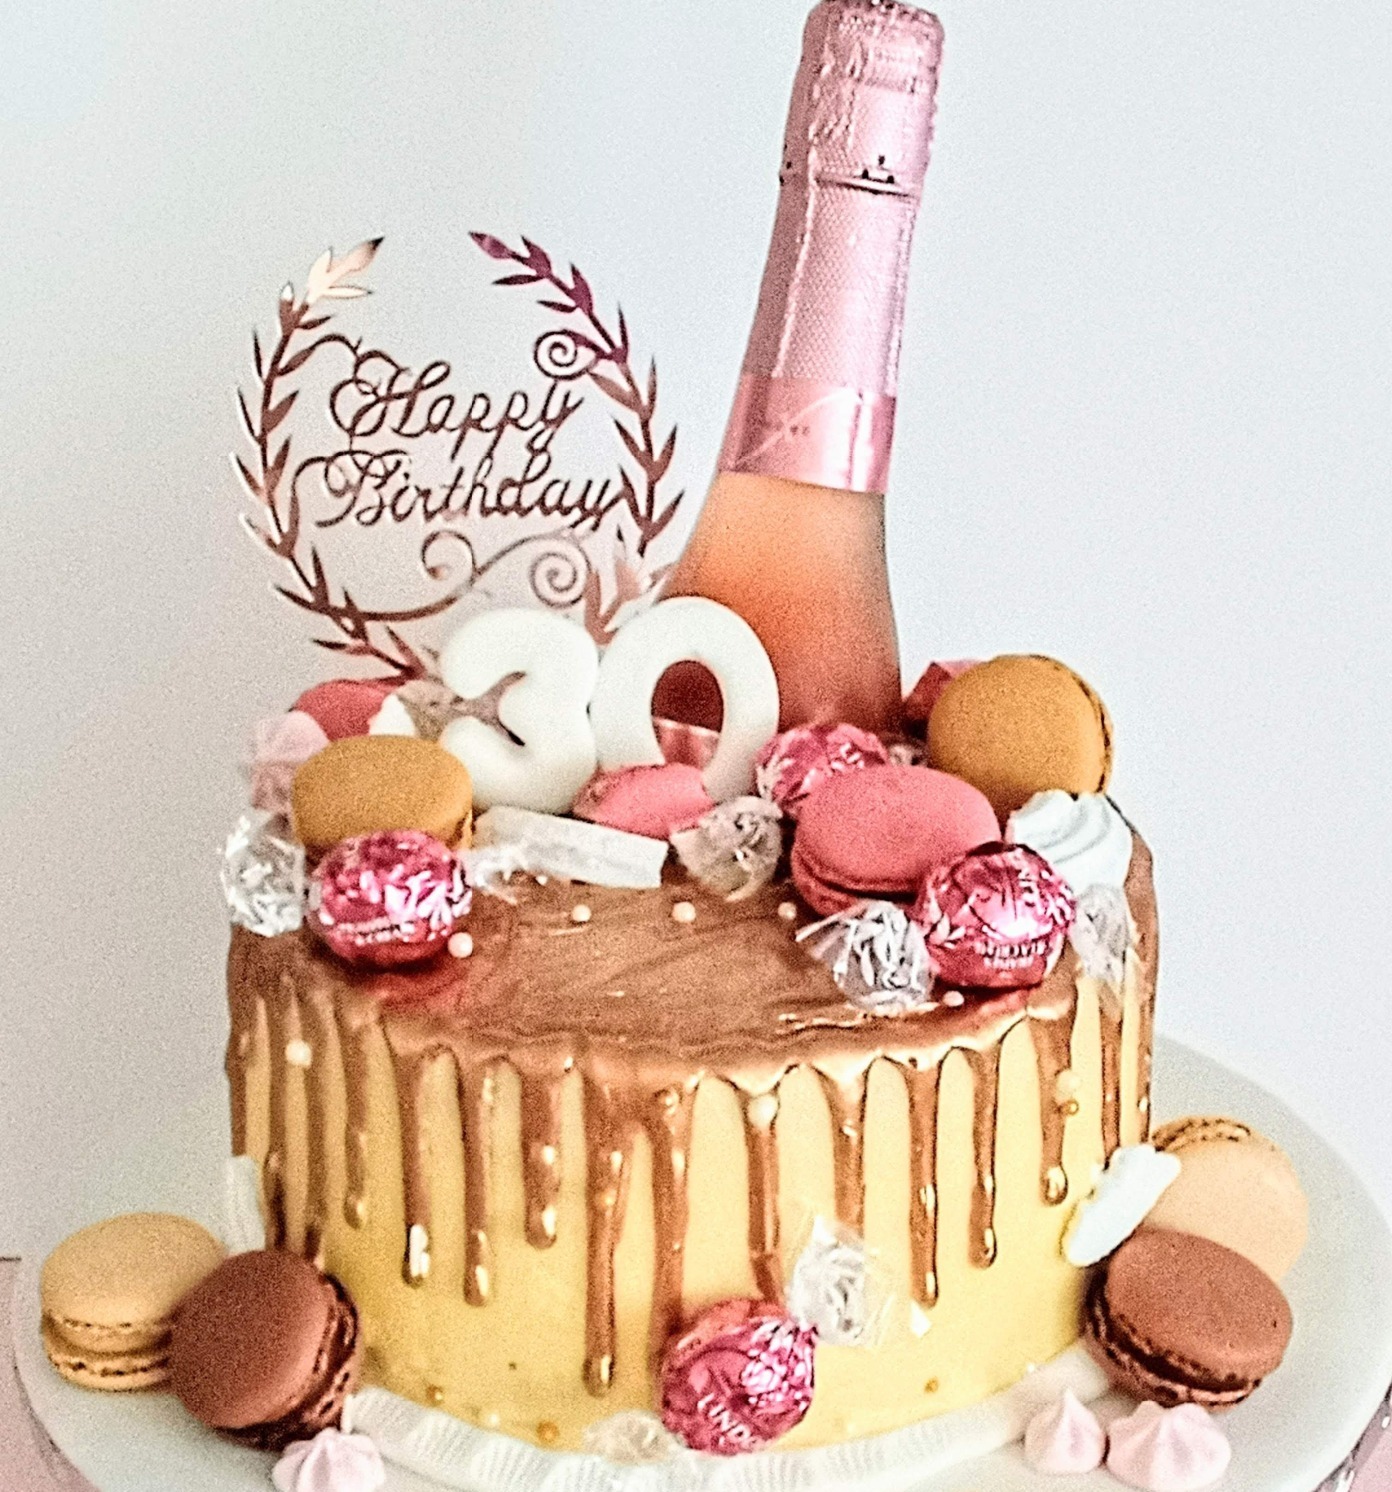 Buttercream rose gold drip cake with champagne